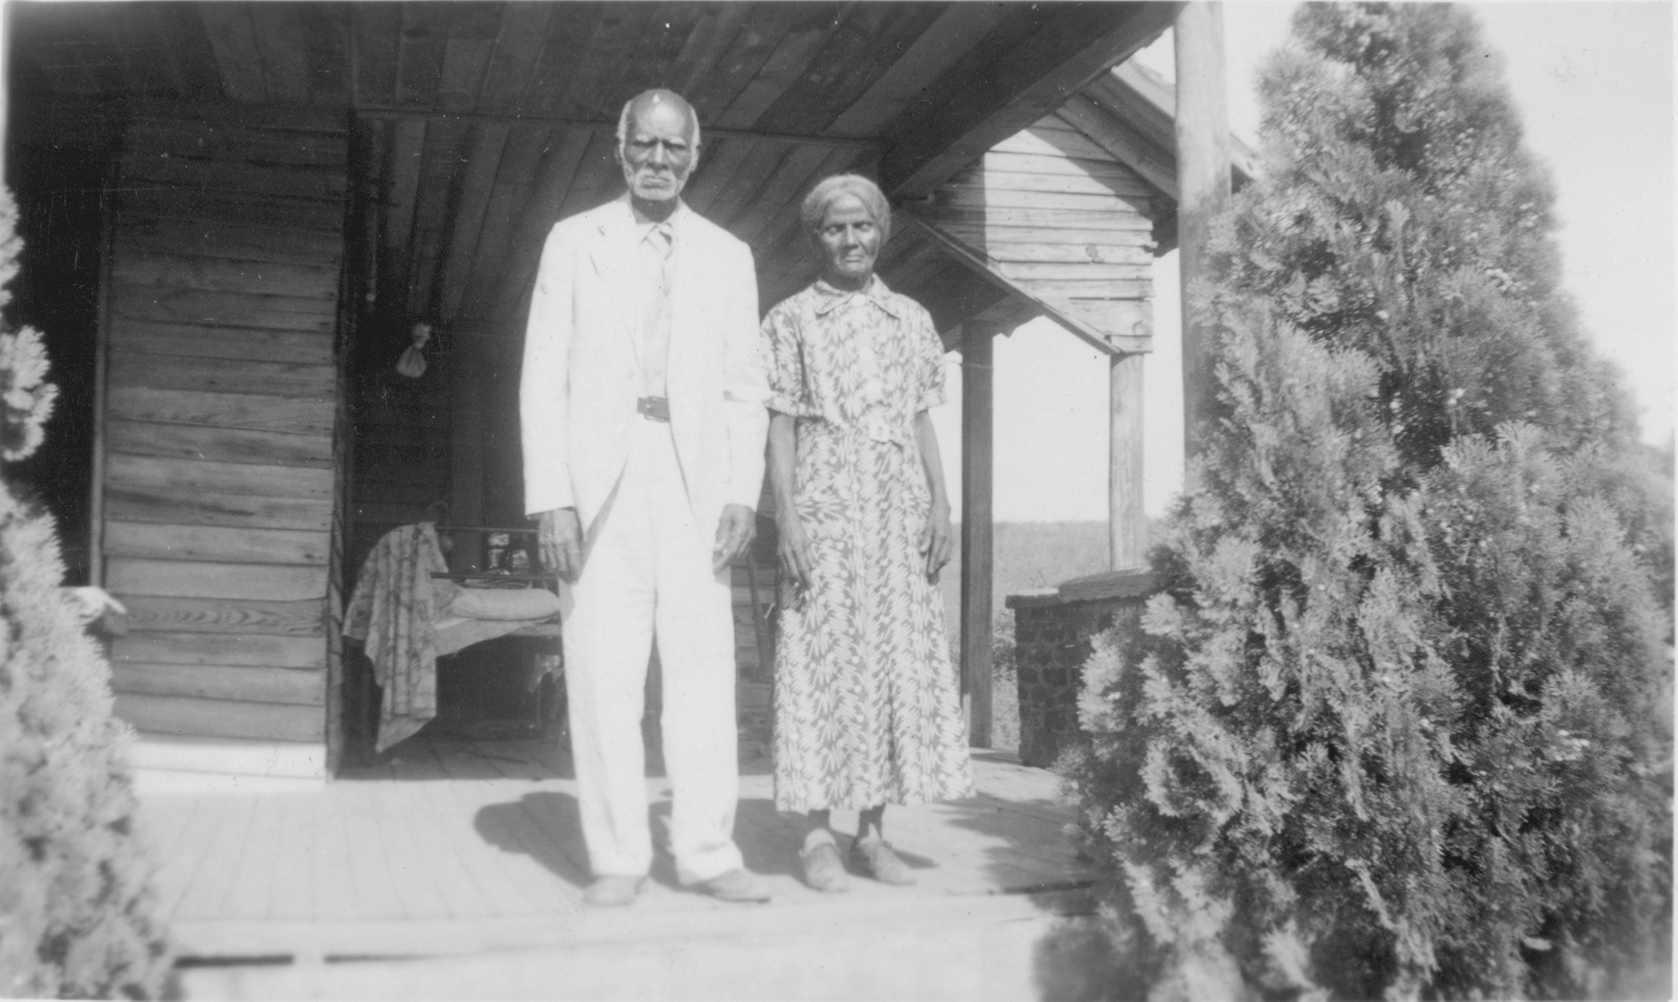 An older African American man and woman standing on a wood house porch. The man, on the right, has white hair and wears a white or light colored suit and the woman has her hair parted in the middle and pulled back. She wears a long pattered dress and her eyes are closed.